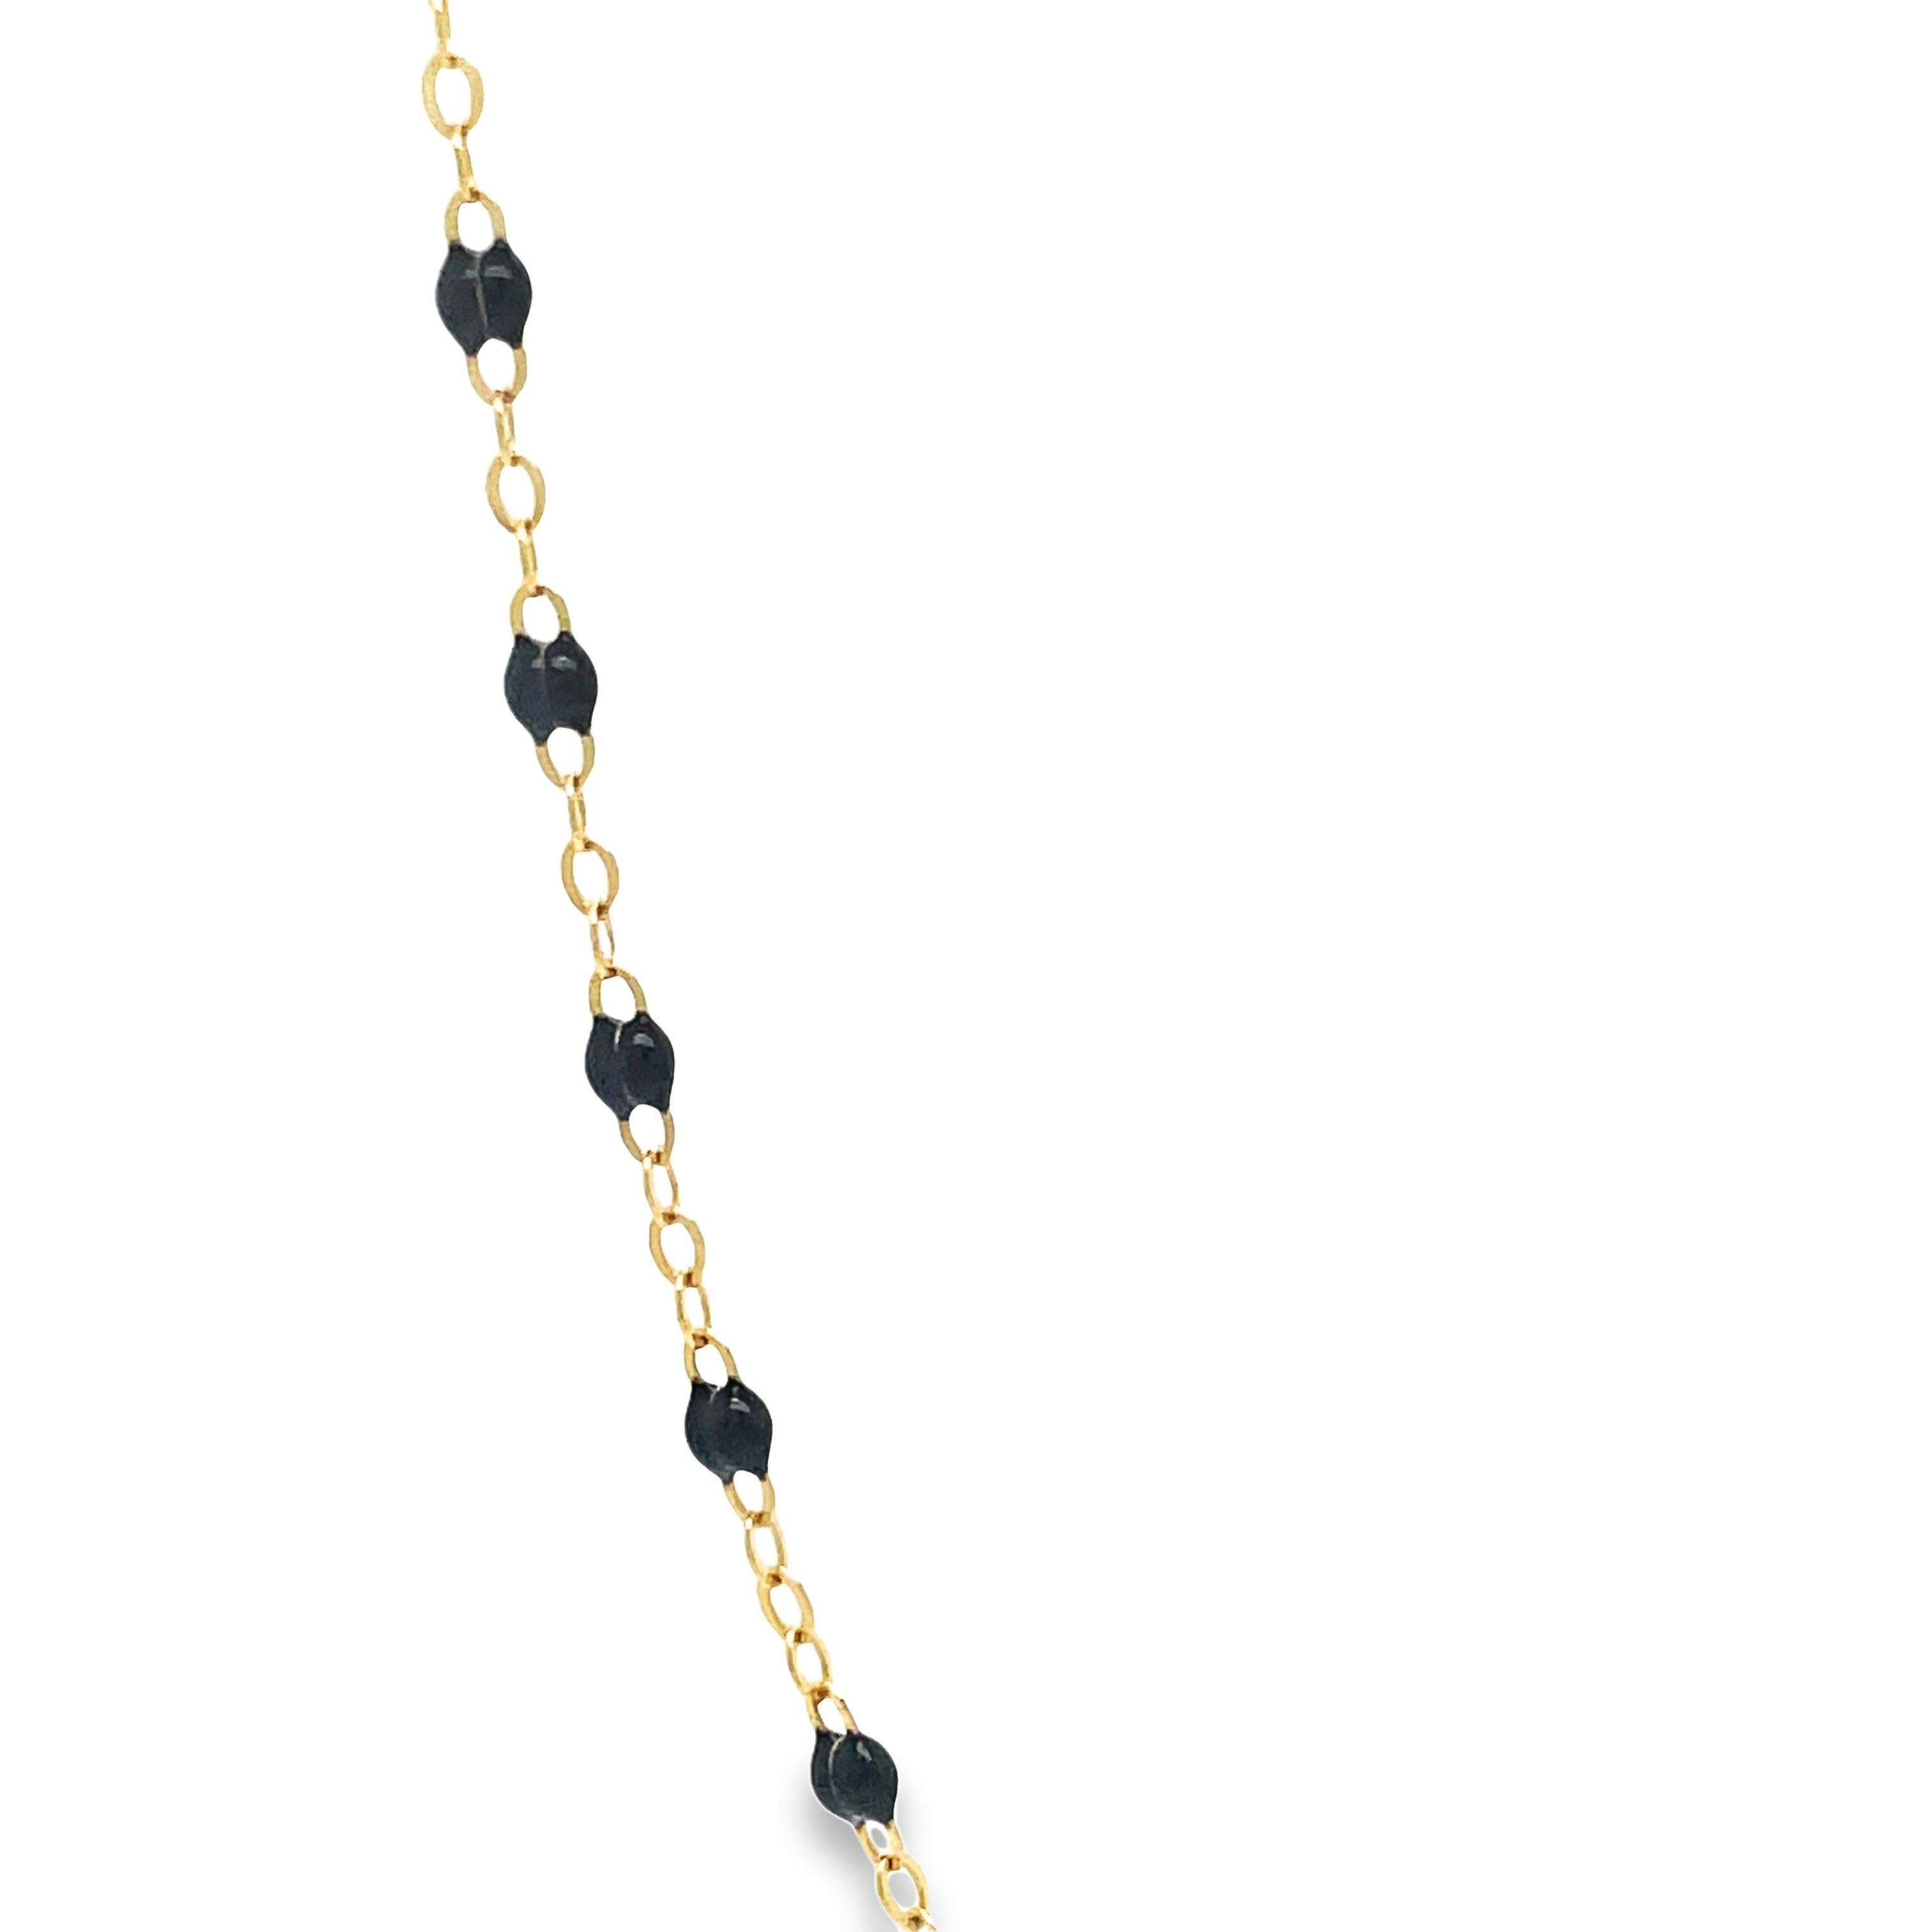 Expertly crafted with 18k yellow gold, this necklace boasts a sleek 20" length and features delicate, small enamel beads in a sophisticated gray hue. The addition of a convenient sizing loop ensures a perfect and comfortable fit. Enhance any outfit with this elegant and timeless piece of jewelry.